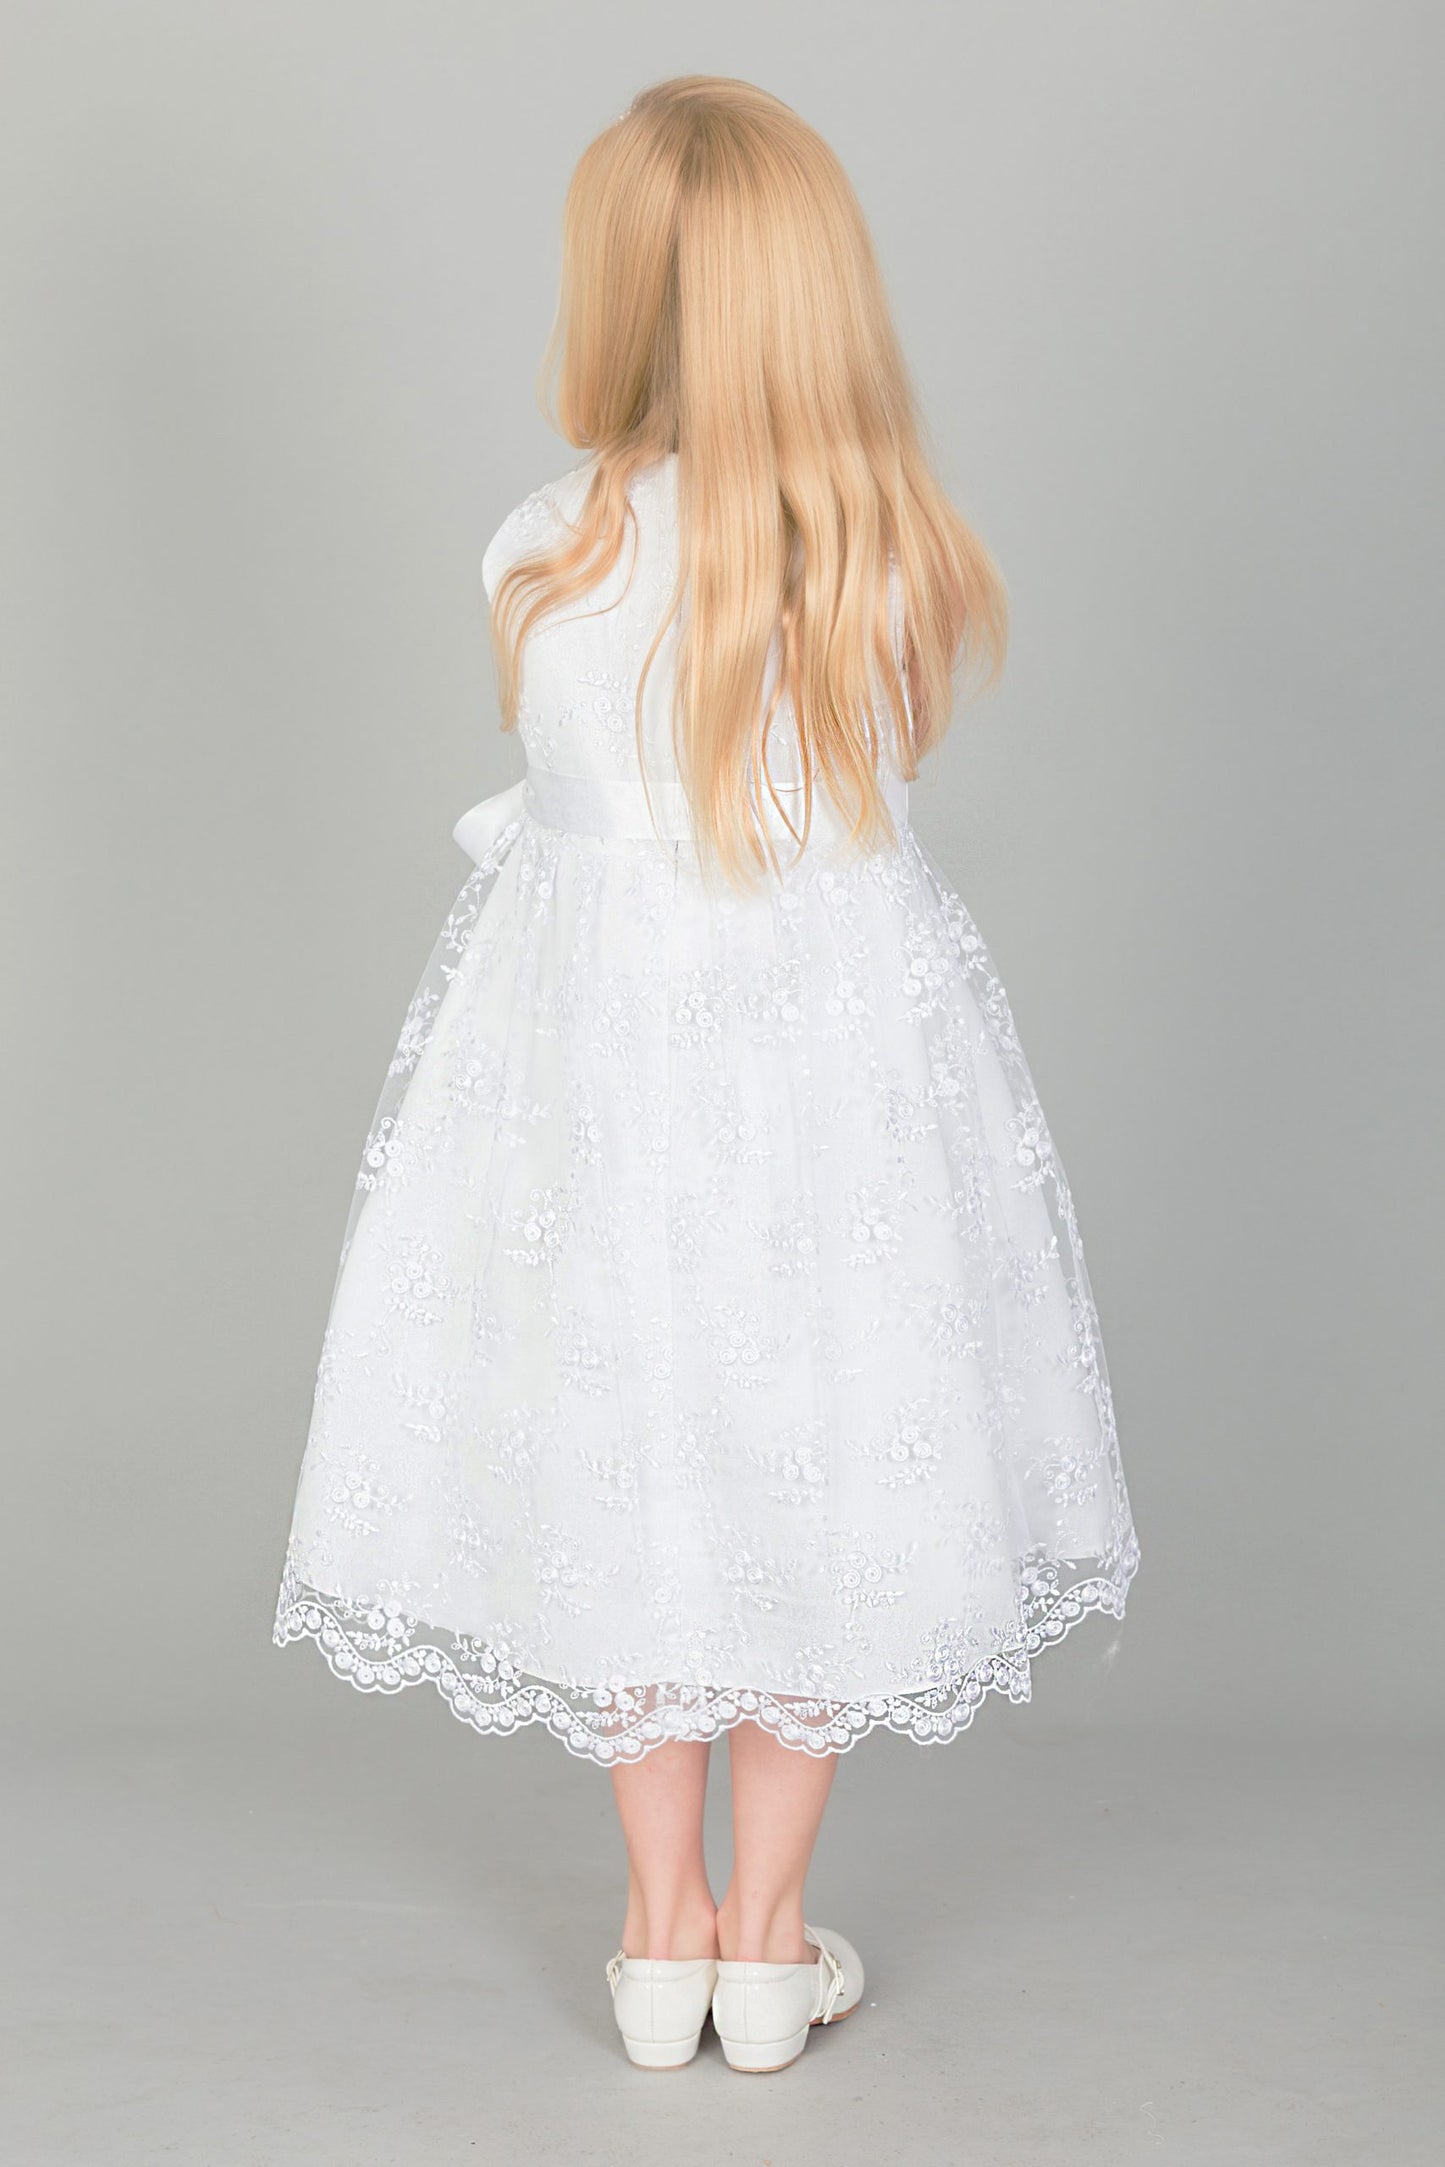 Girls Lace dress with Bow in IVORY or WHITE